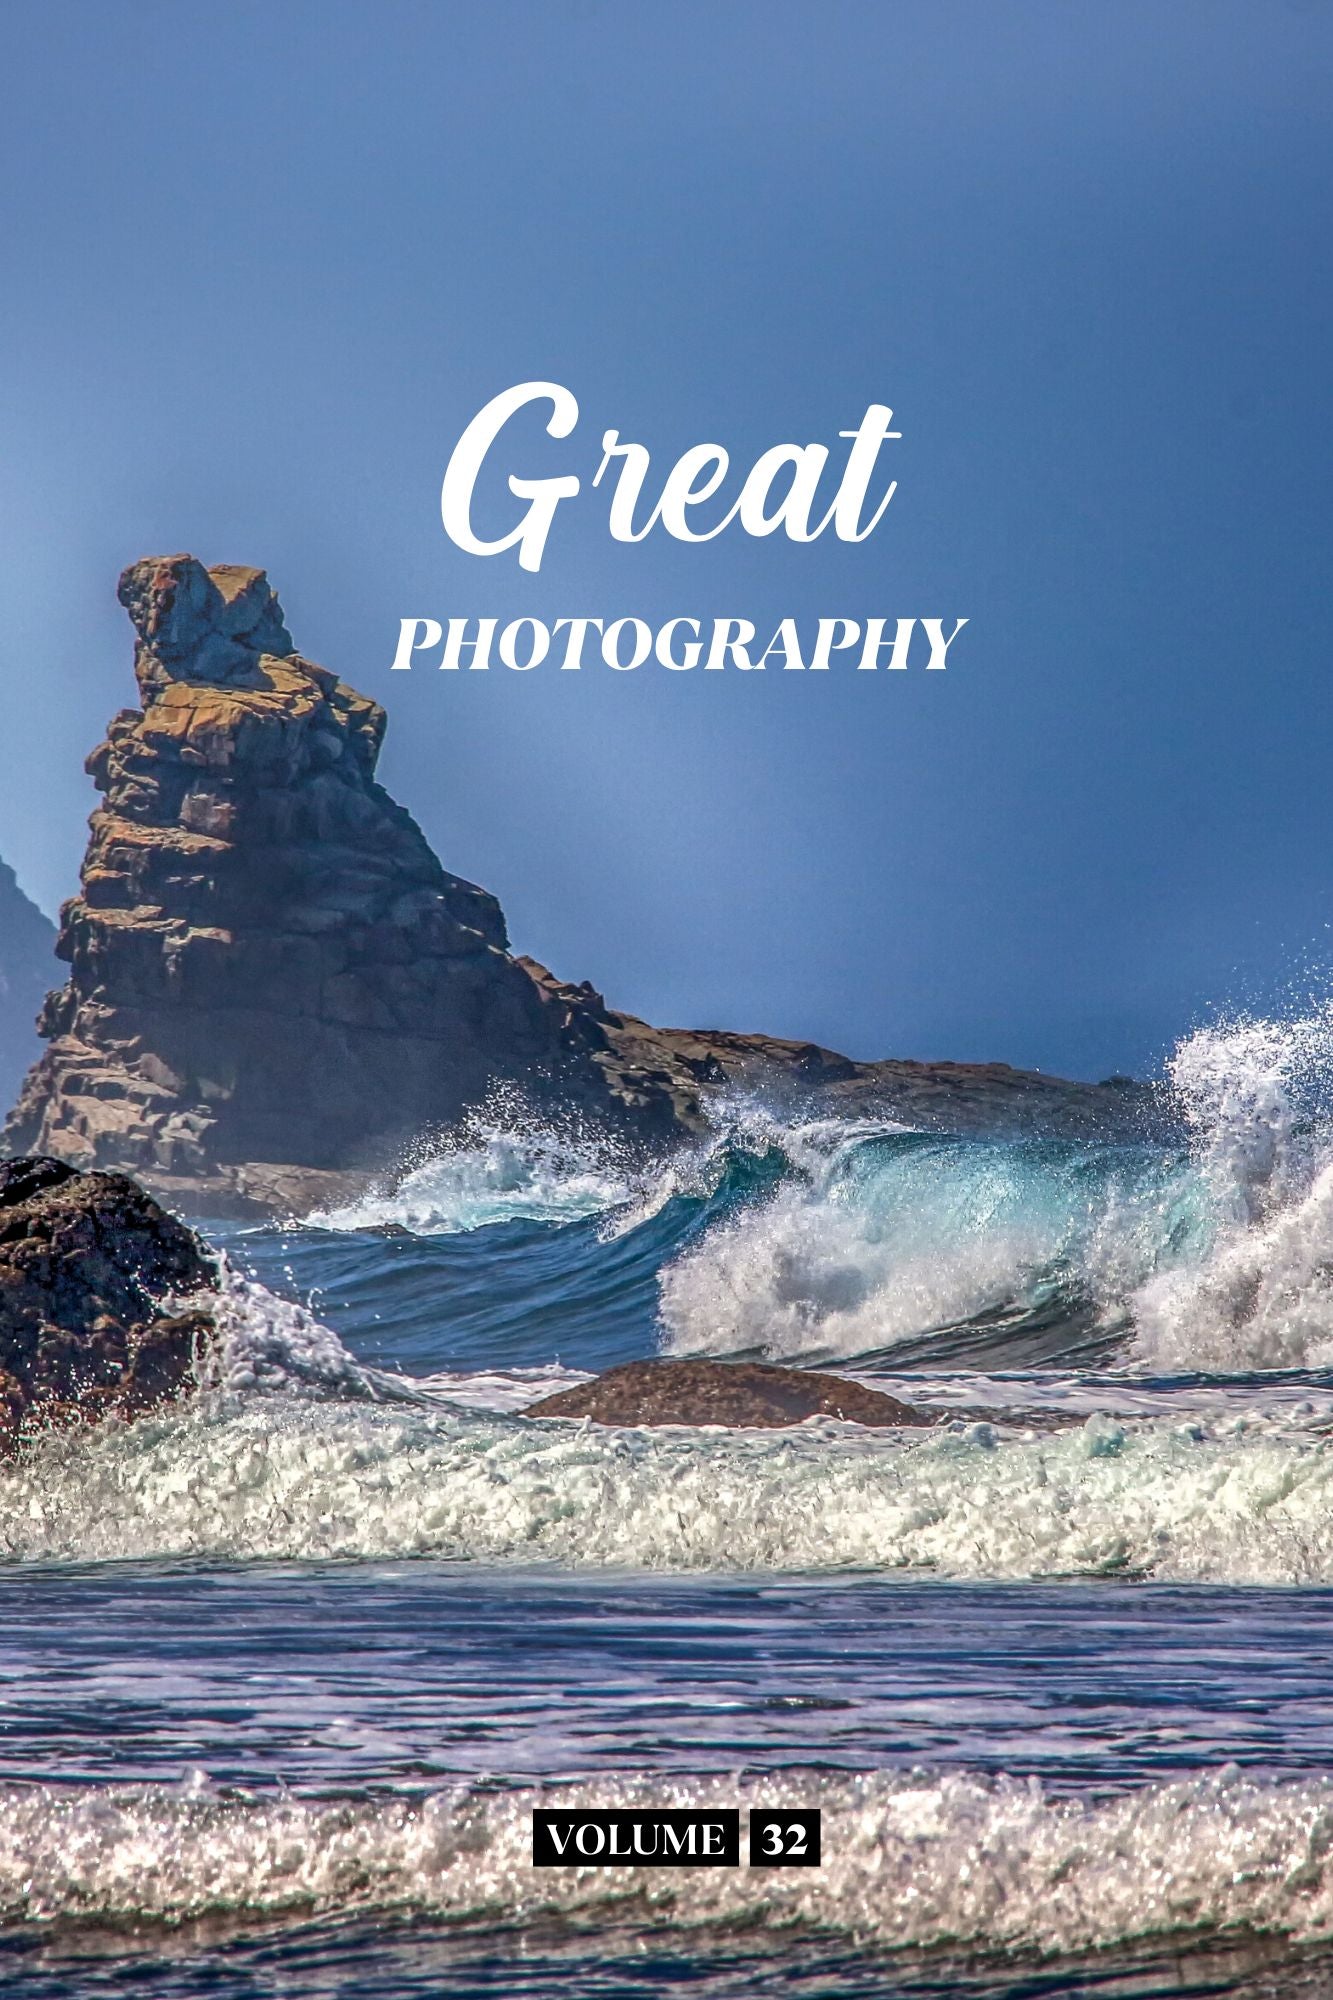 Great Photography Volume 32 (Physical Book Pre-Order)